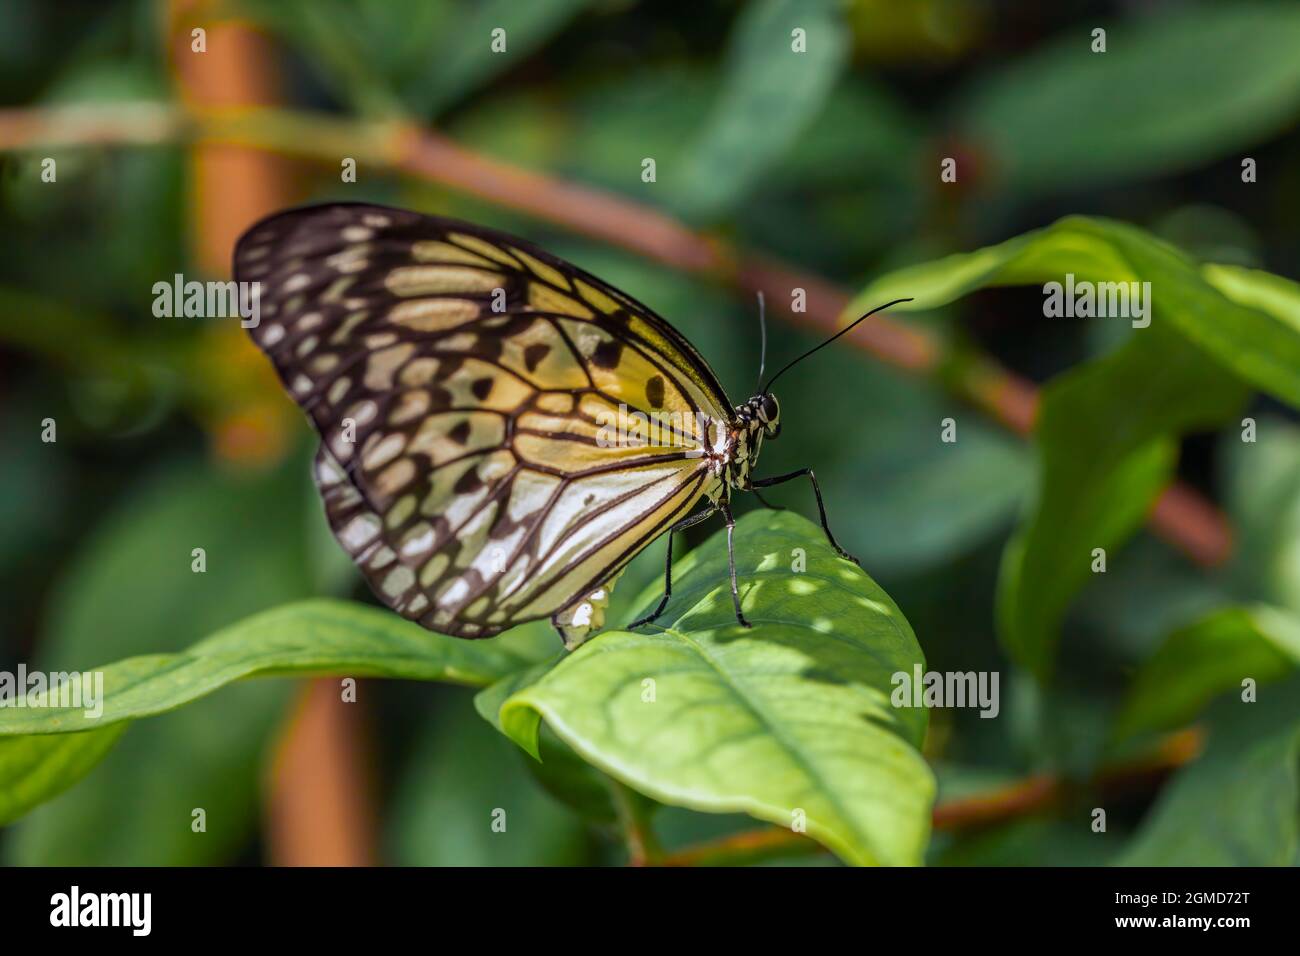 Beautiful tropıical butterfly called Large Tree Nymph | Paper Kite | Idea leuconoe standing on green leaves in Konya tropical butterfly garden Stock Photo